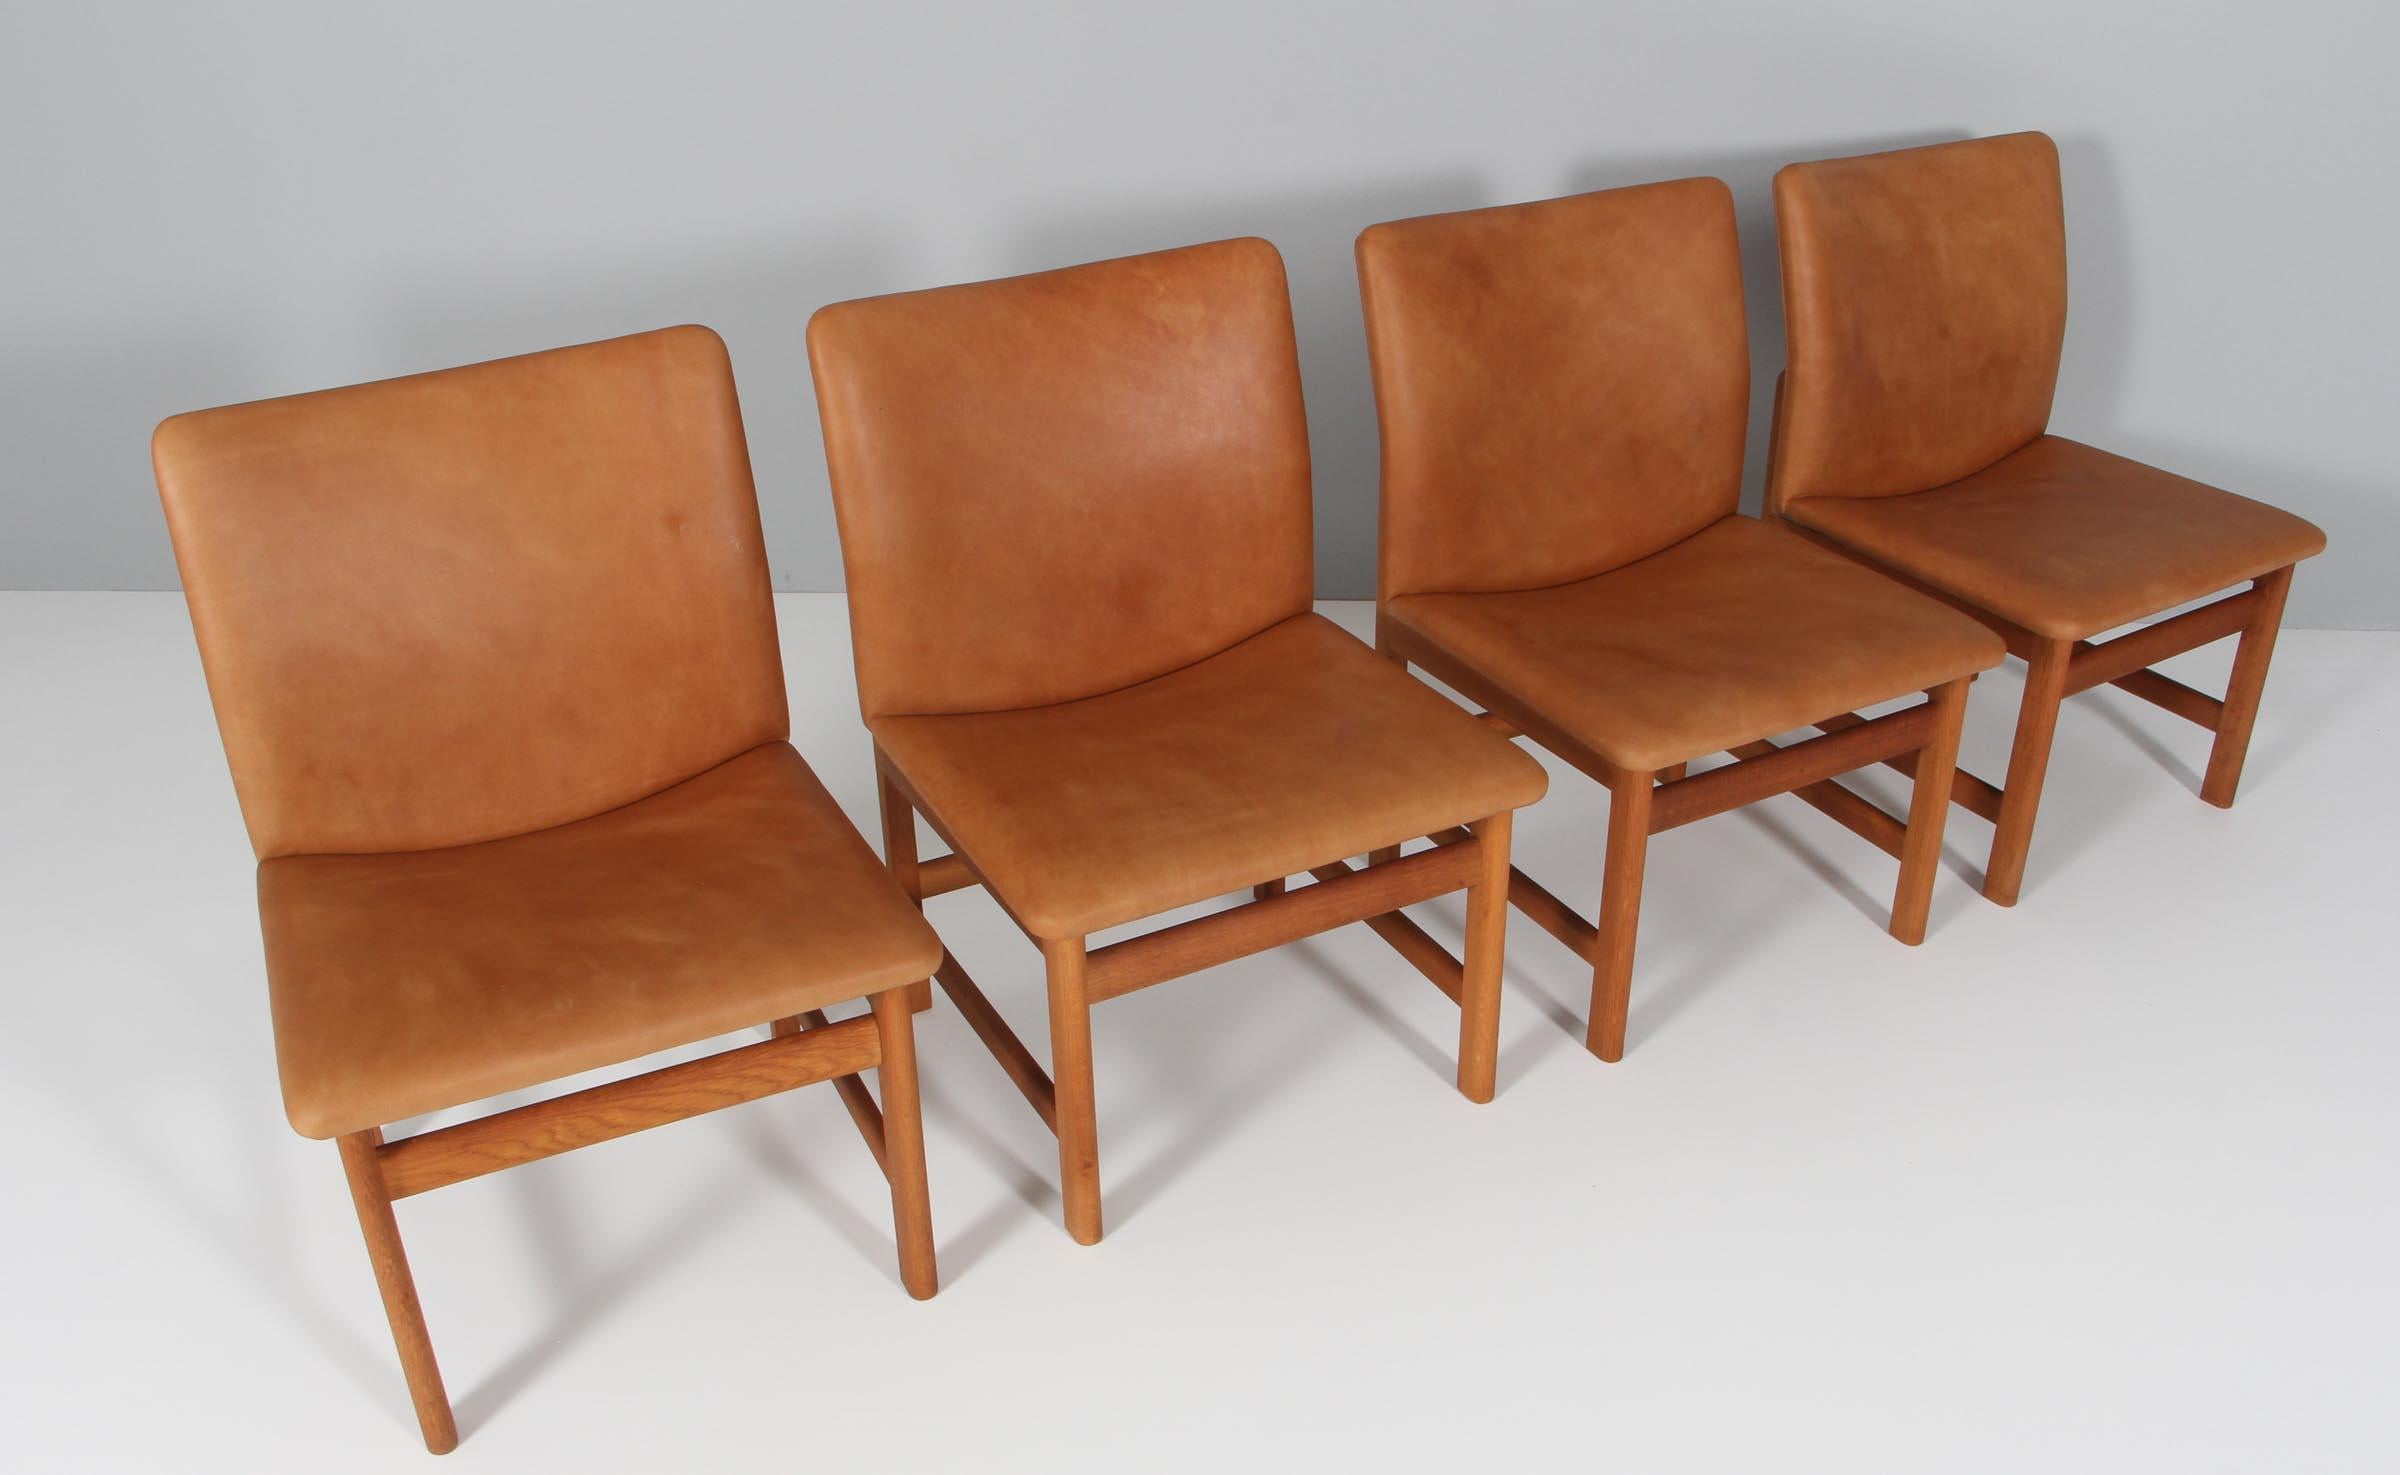 Børge Mogensen lounge chairs new upholstered with vintage aniline leather.

Frame of oak.

Model 3231 rarely seen, made by Fredericia furniture.